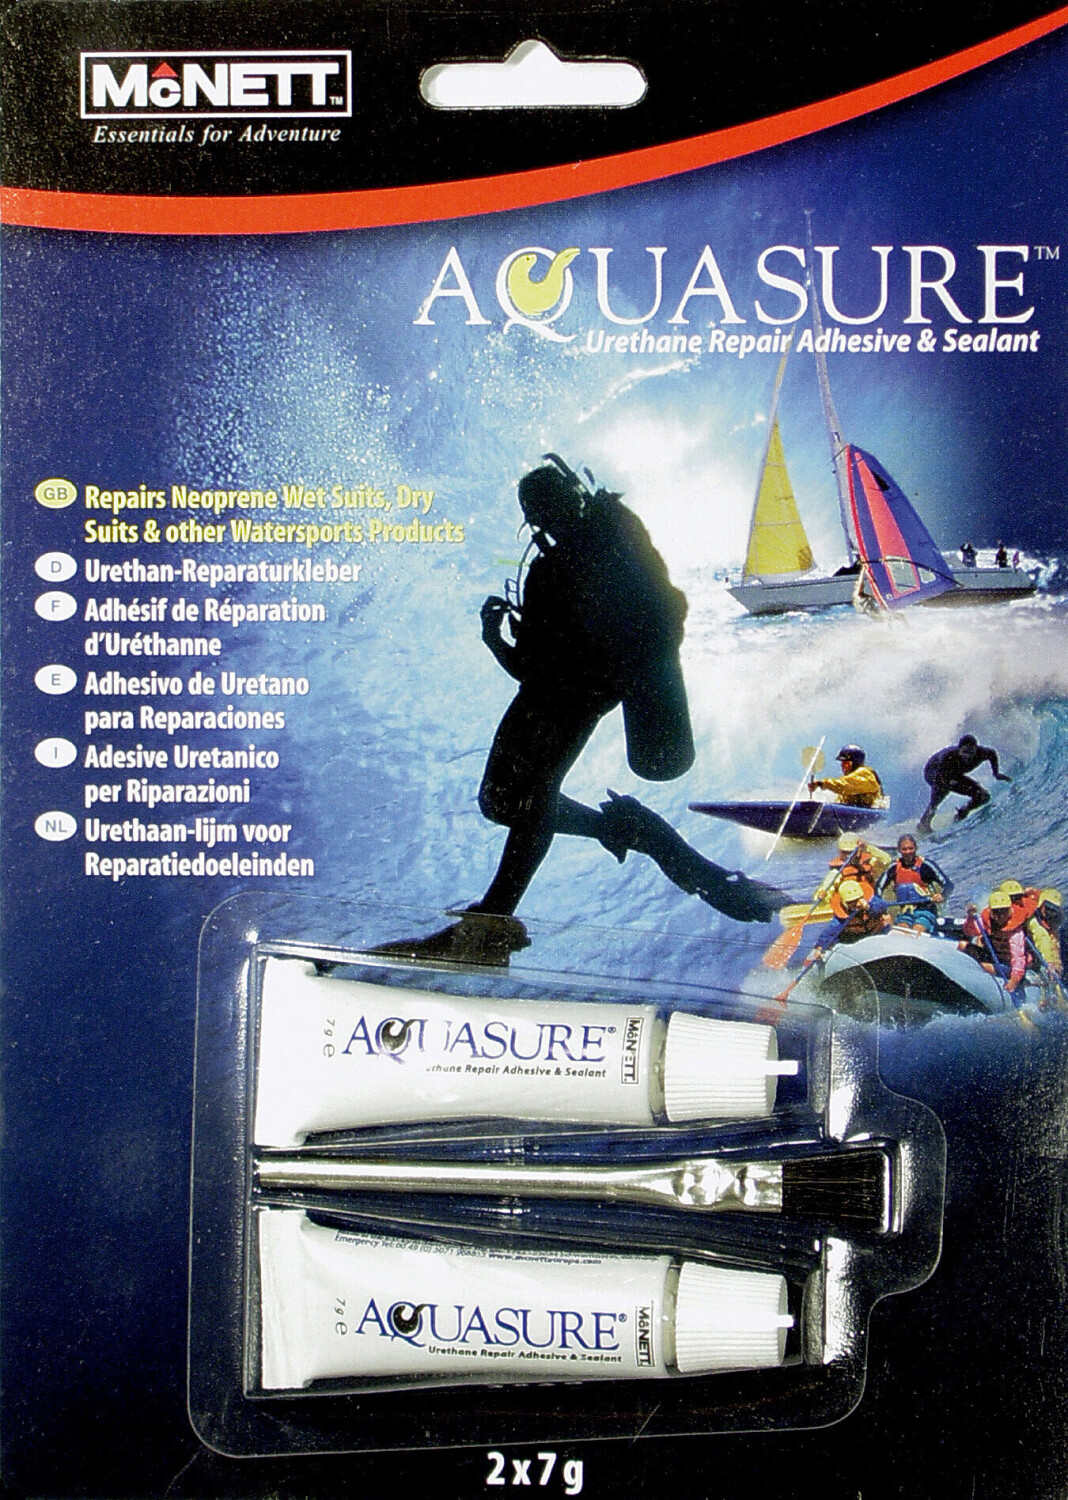 Photos - Other goods for tourism McNett AquaSure  (2x7g)